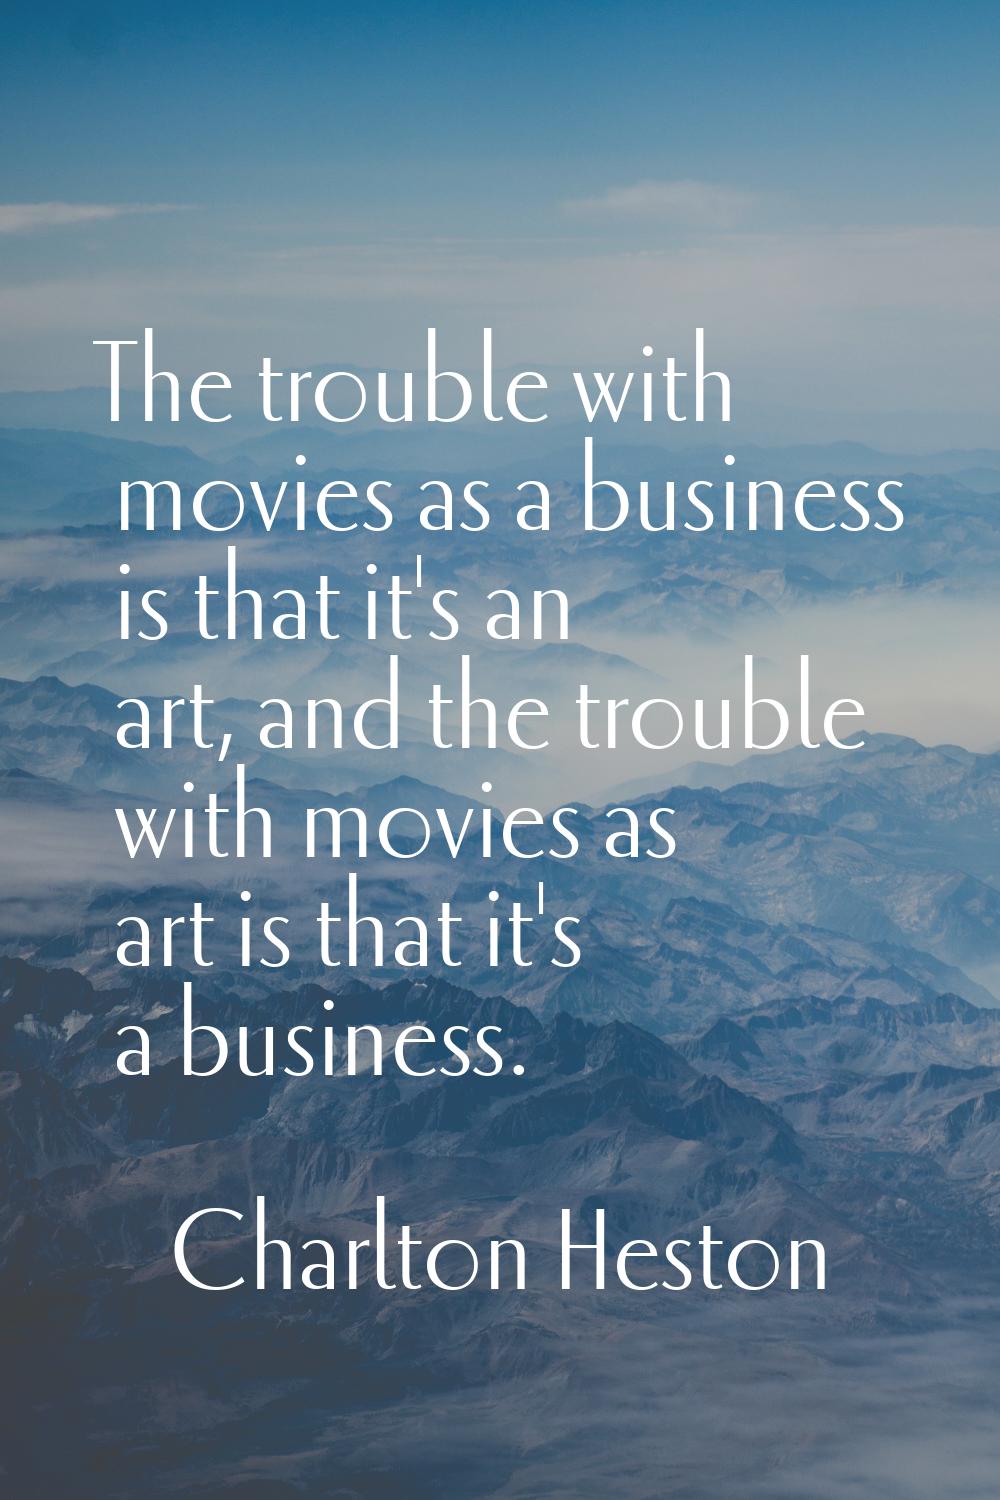 The trouble with movies as a business is that it's an art, and the trouble with movies as art is th